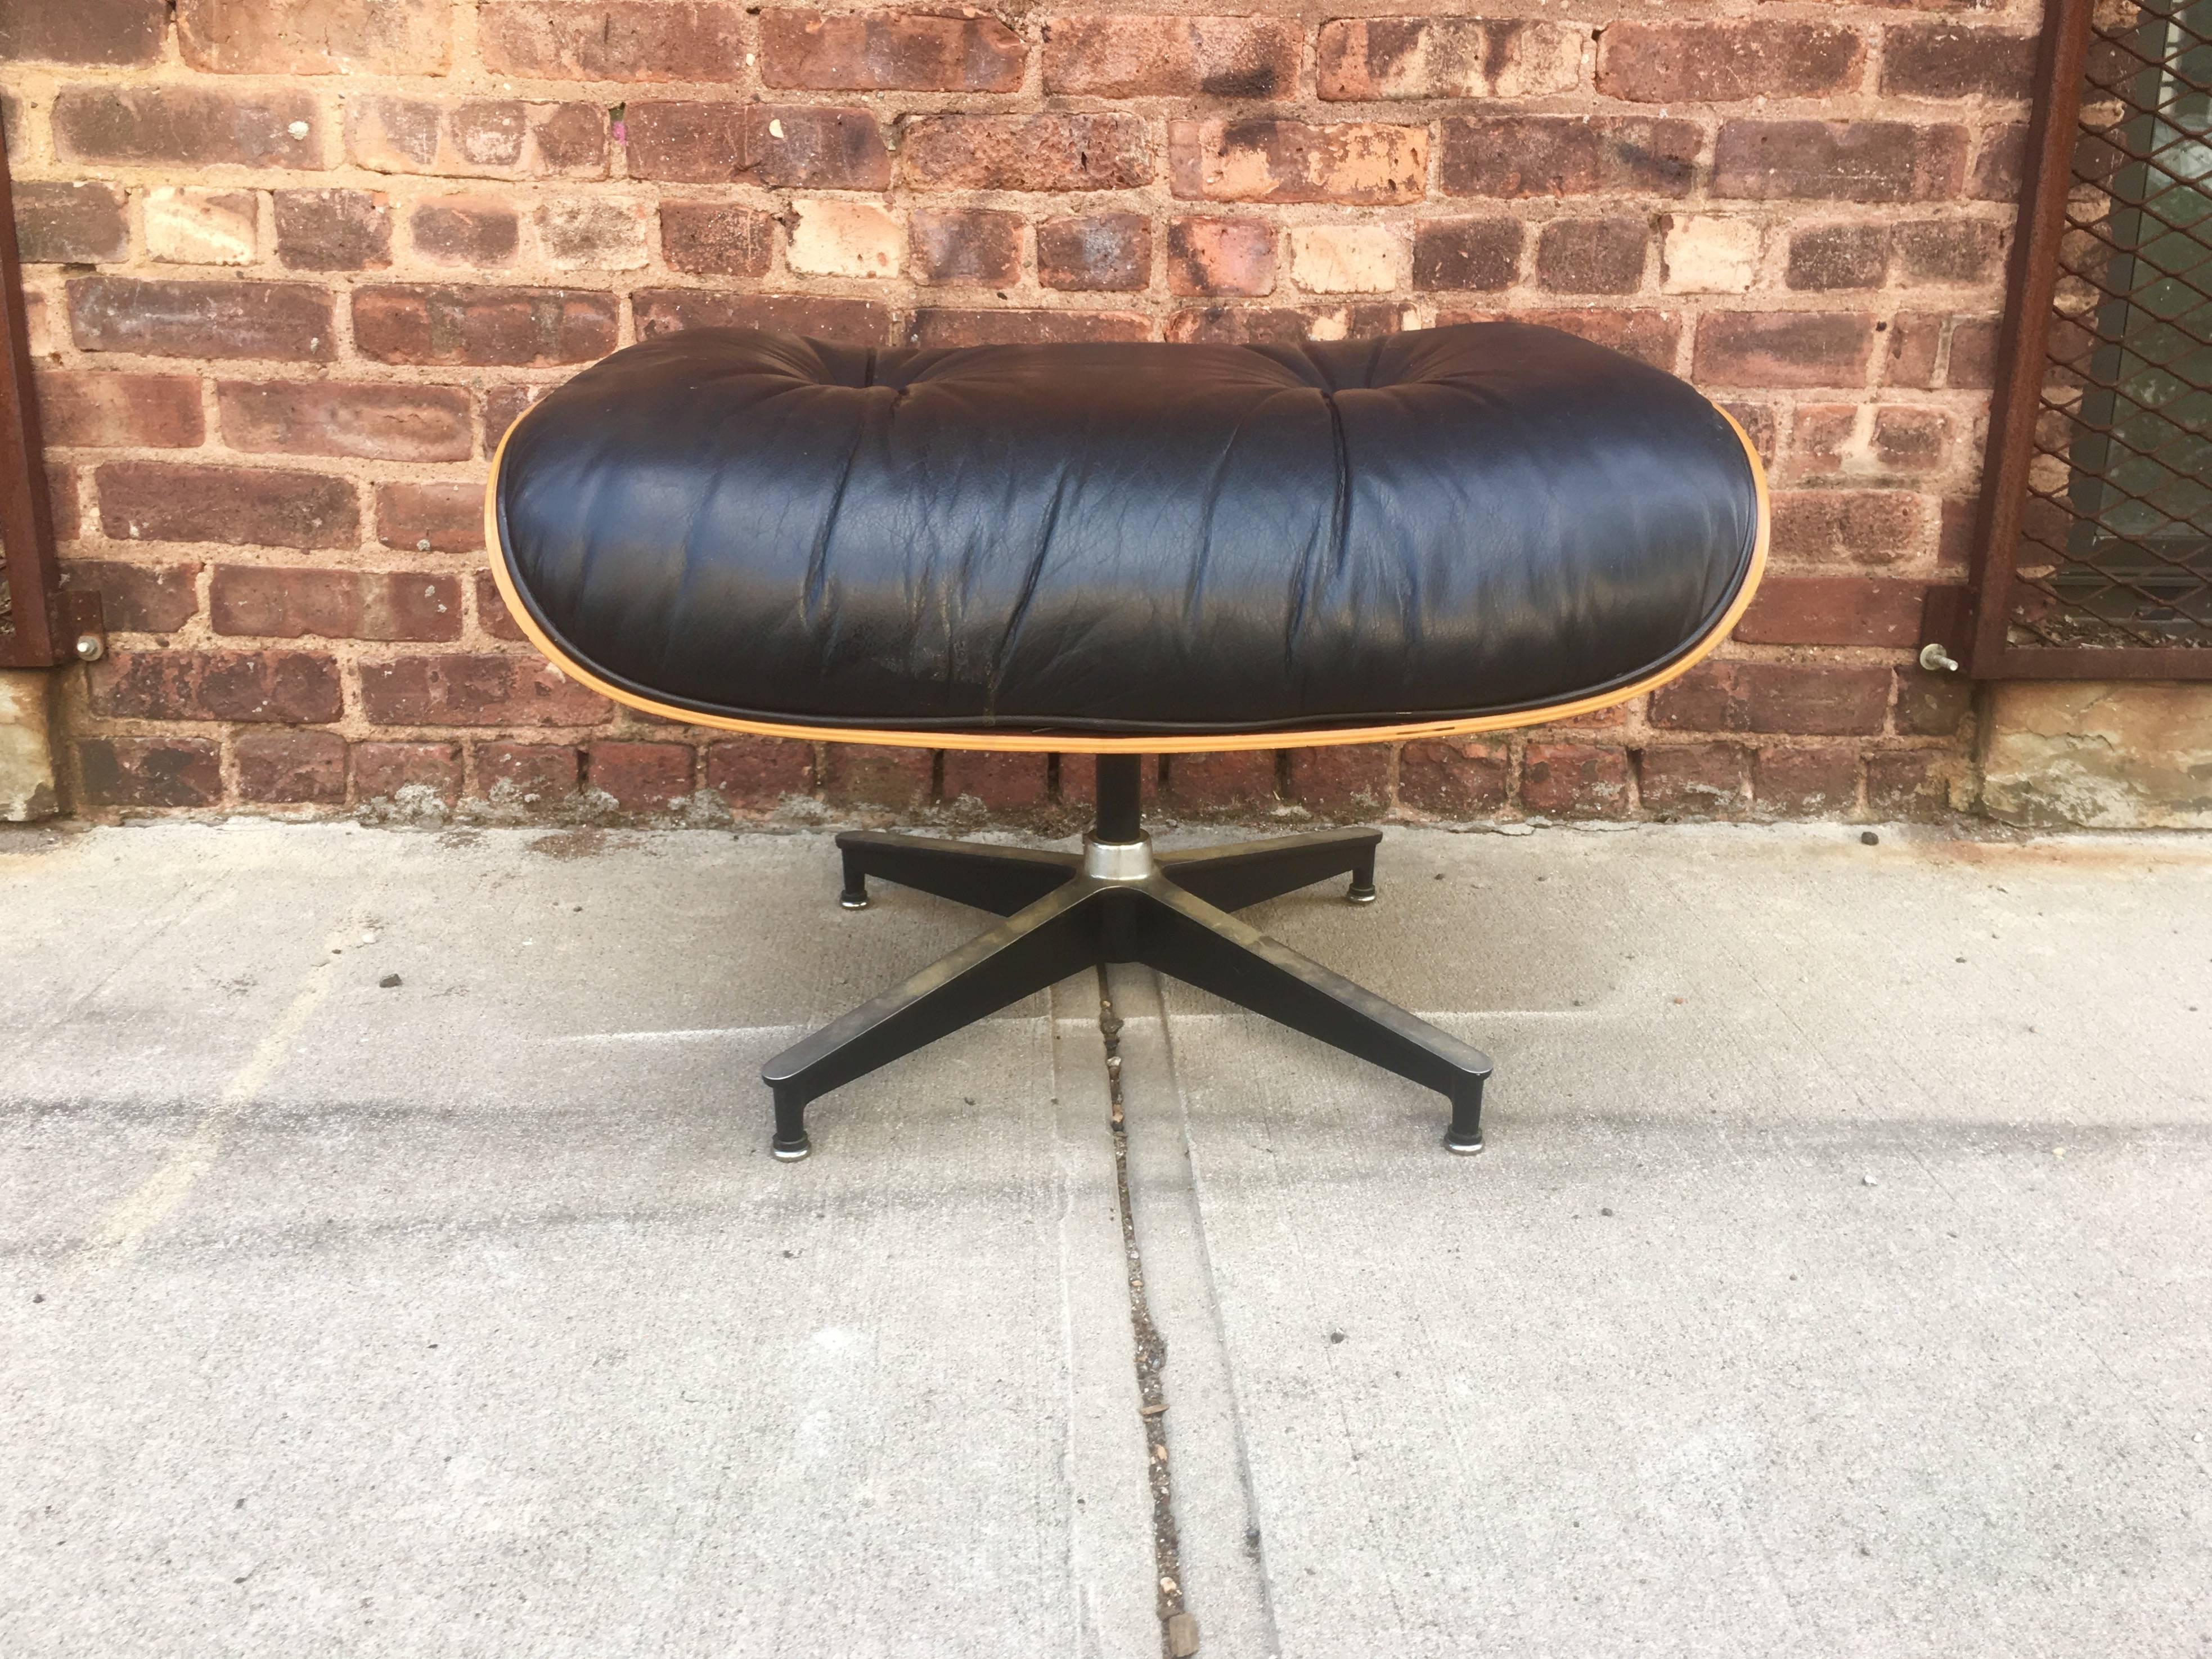 Incredible Herman Miller Eames lounge chair and ottoman. In fantastic condition. From the 1970s.